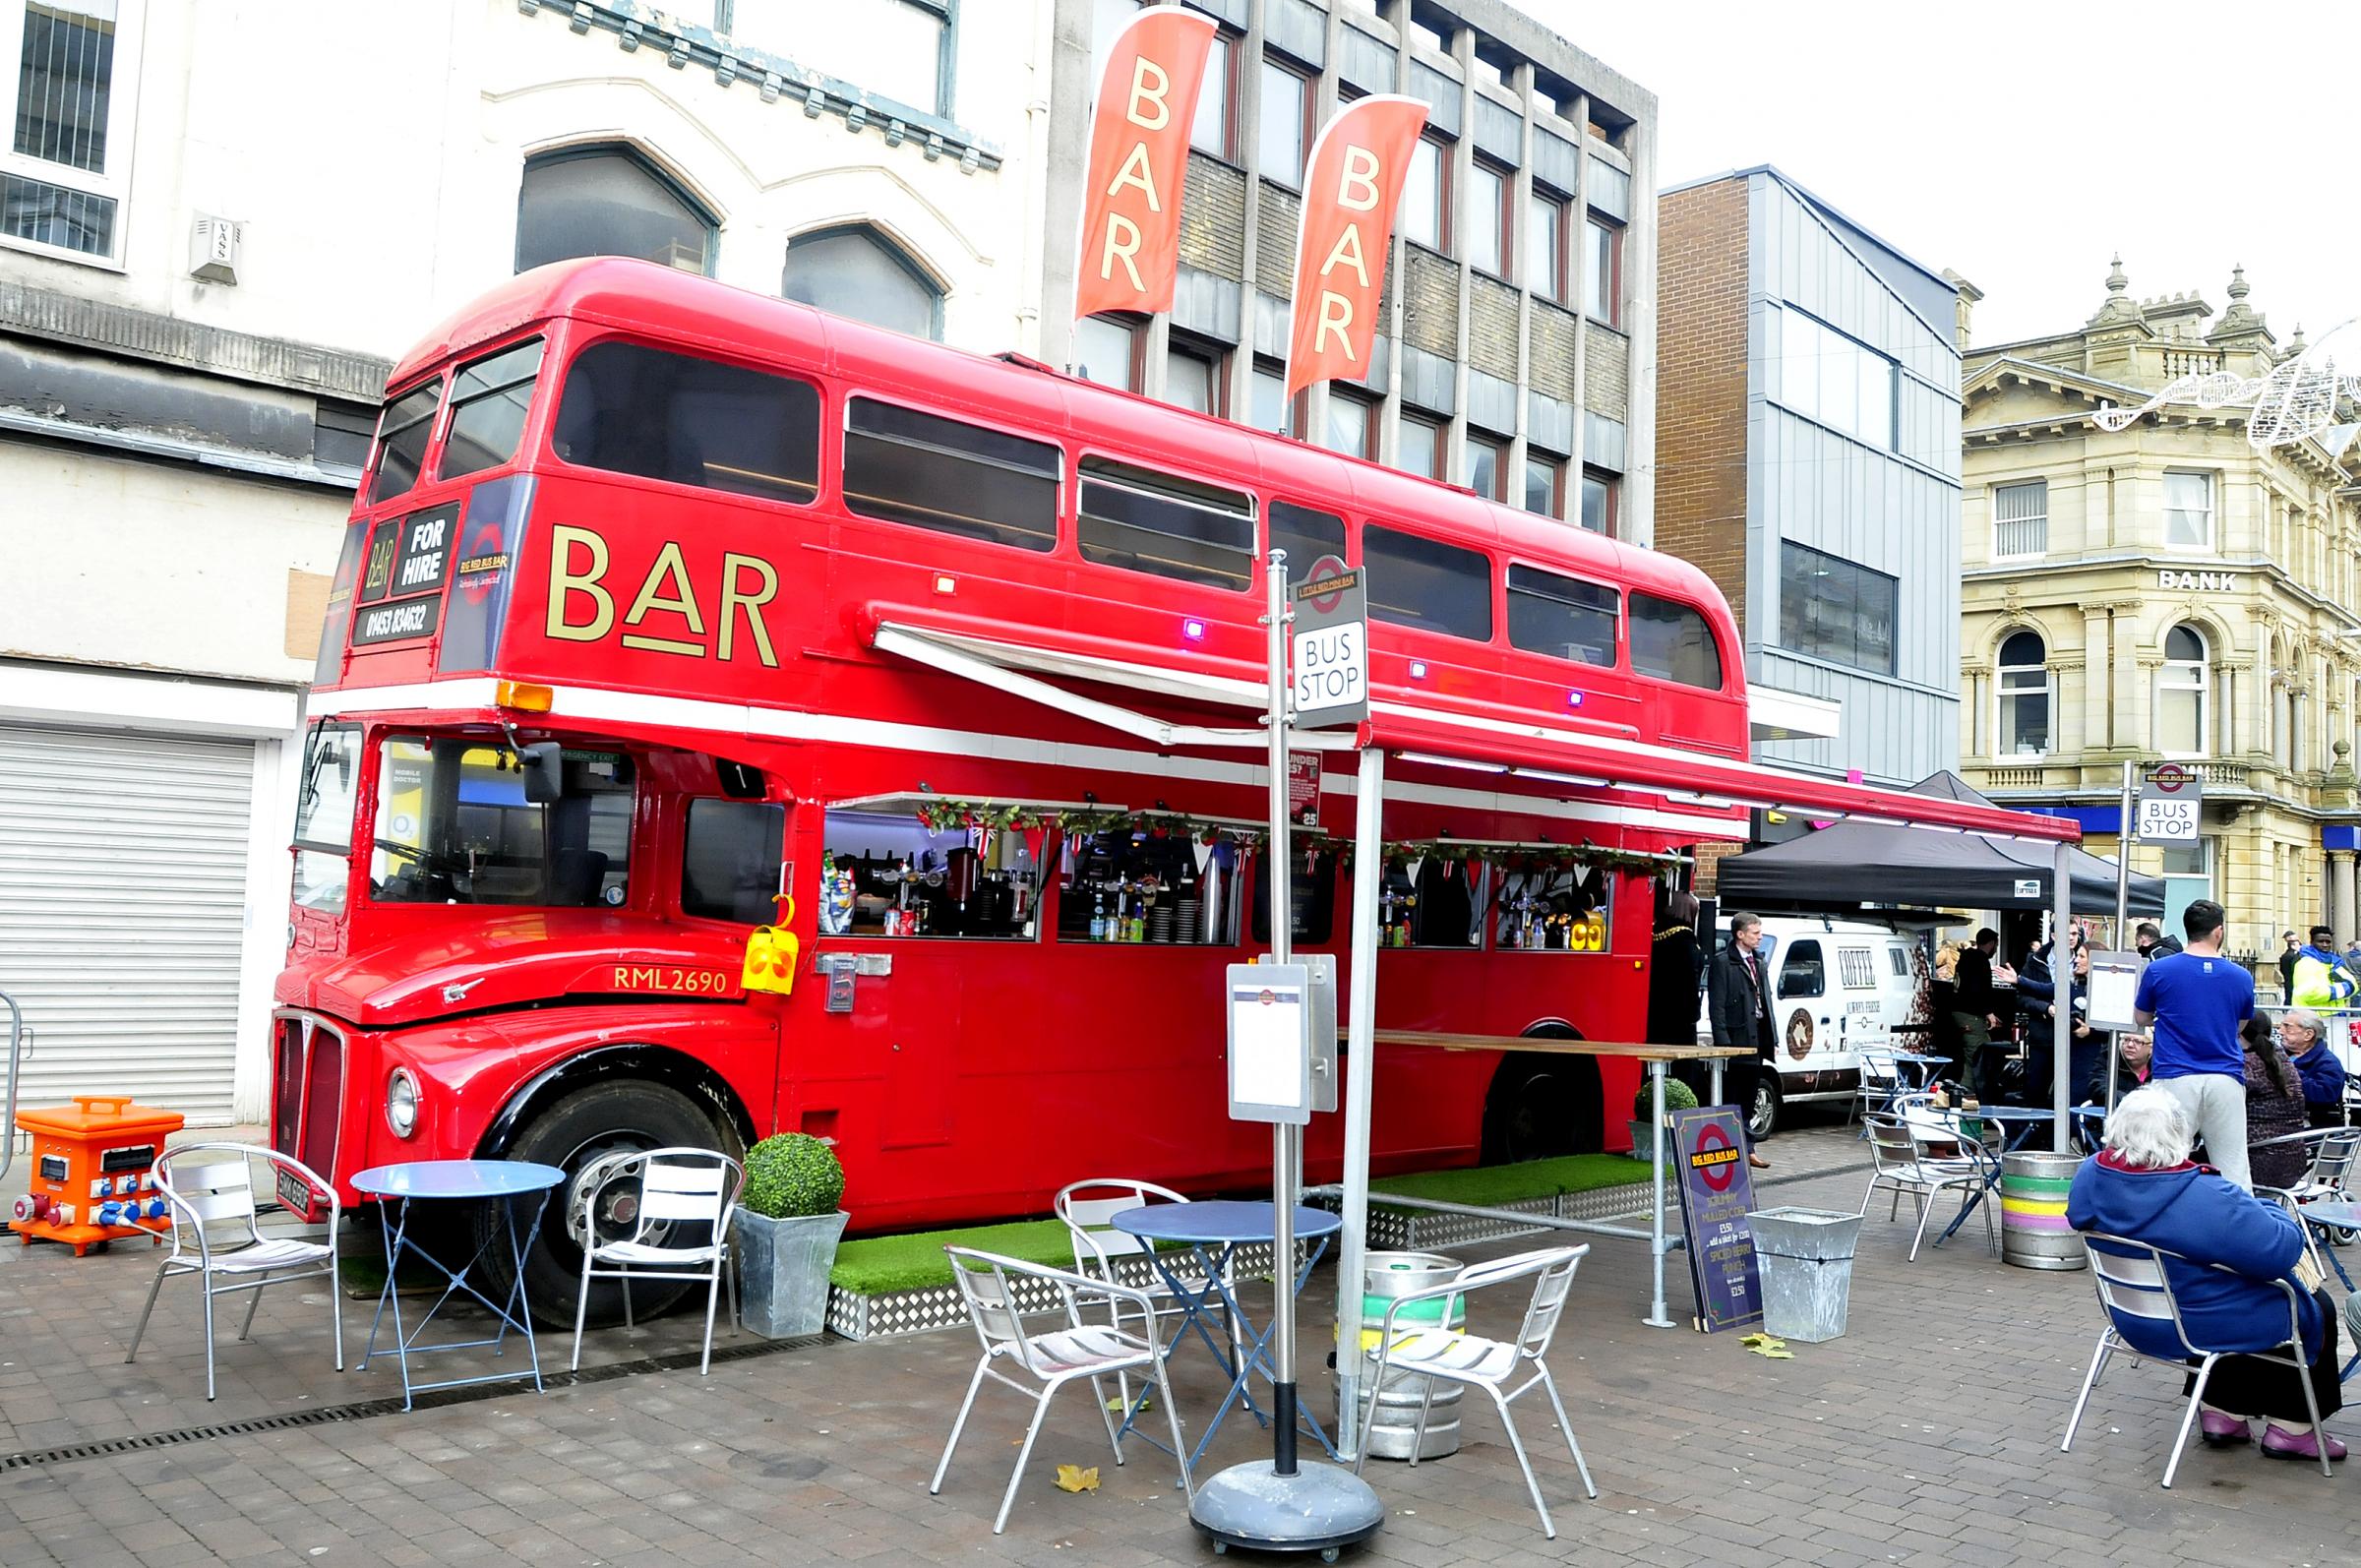 PICTURES: Hop on-board the bus bar for some festive cheer